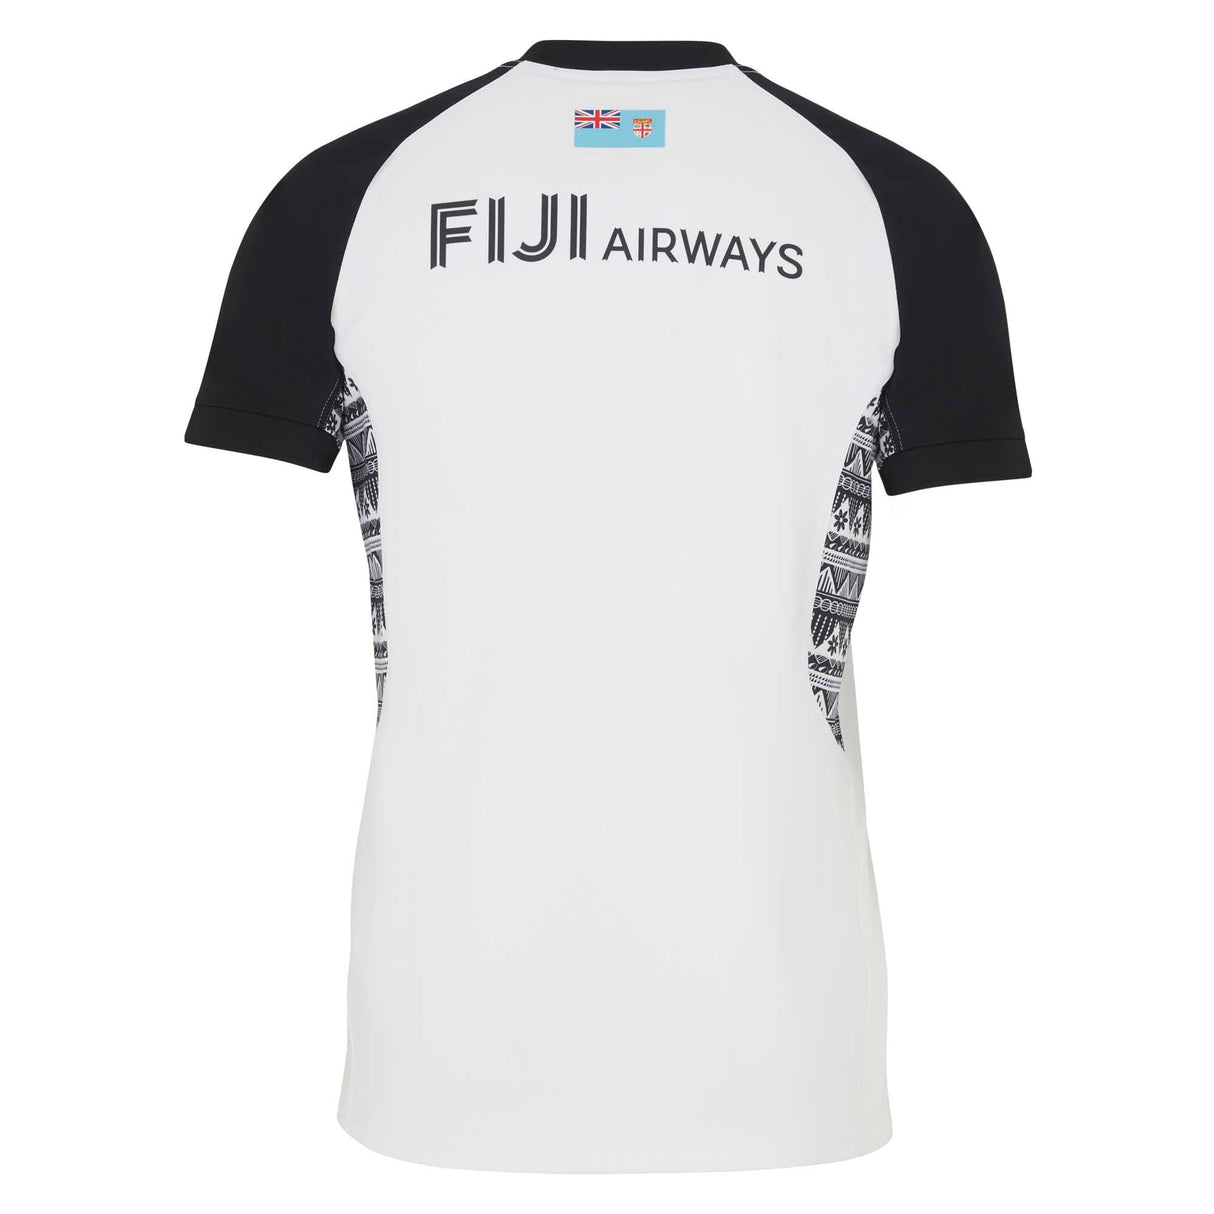 Nike Men's Fiji Rugby 7s Stadium Home Replica Jersey - White |7's Replica Jersey | Nike 7s Shirt | Absolute Rugby